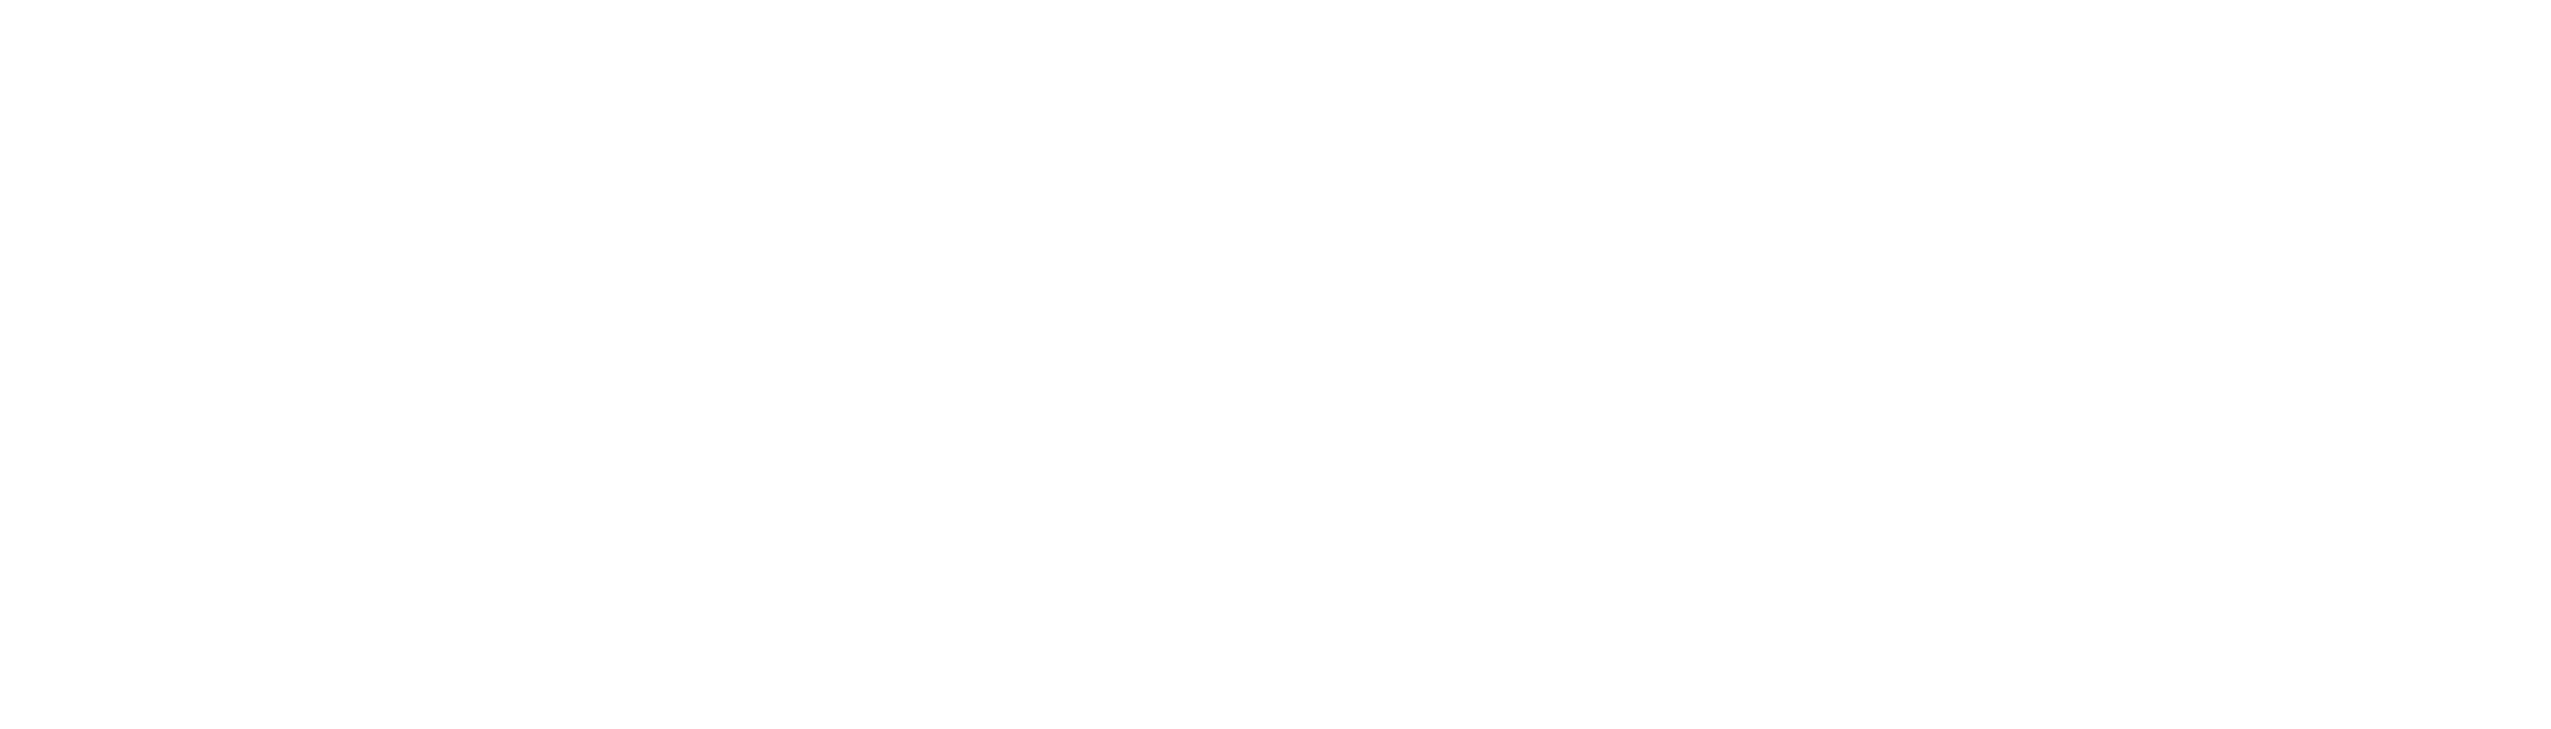 active recovery logo